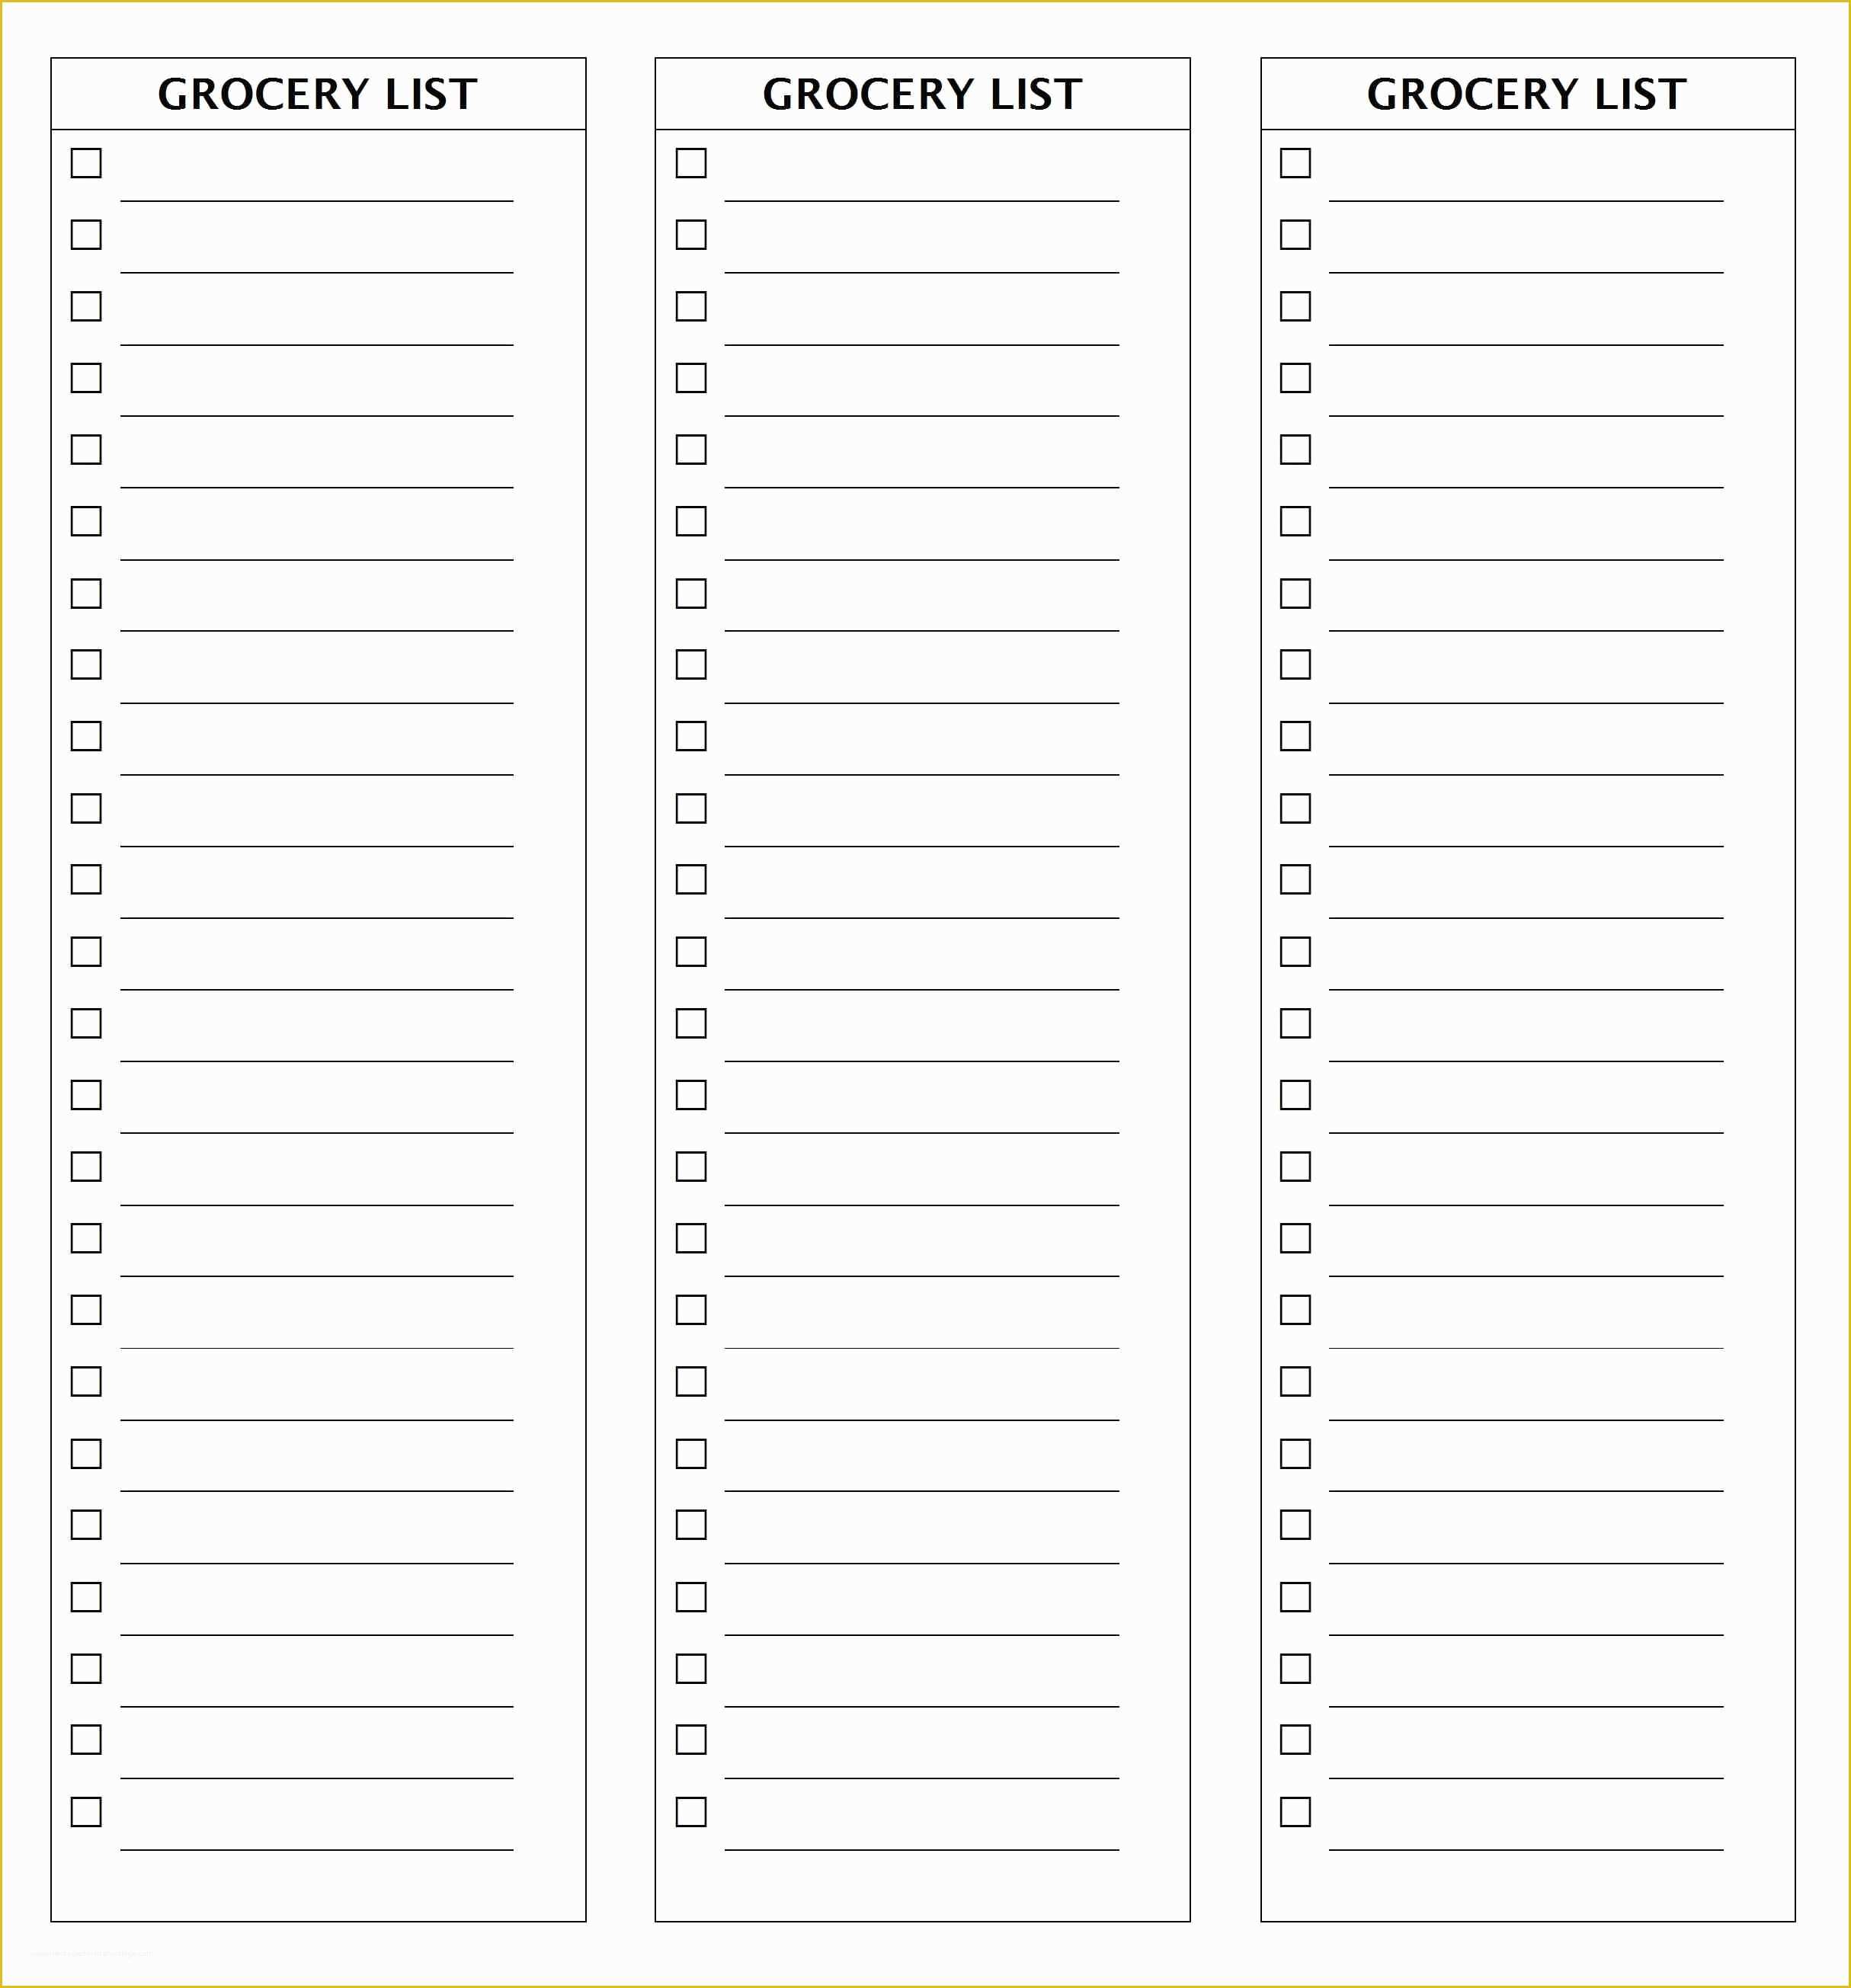 Free Roster Templates Printable Of 28 Free Printable Grocery List Templates